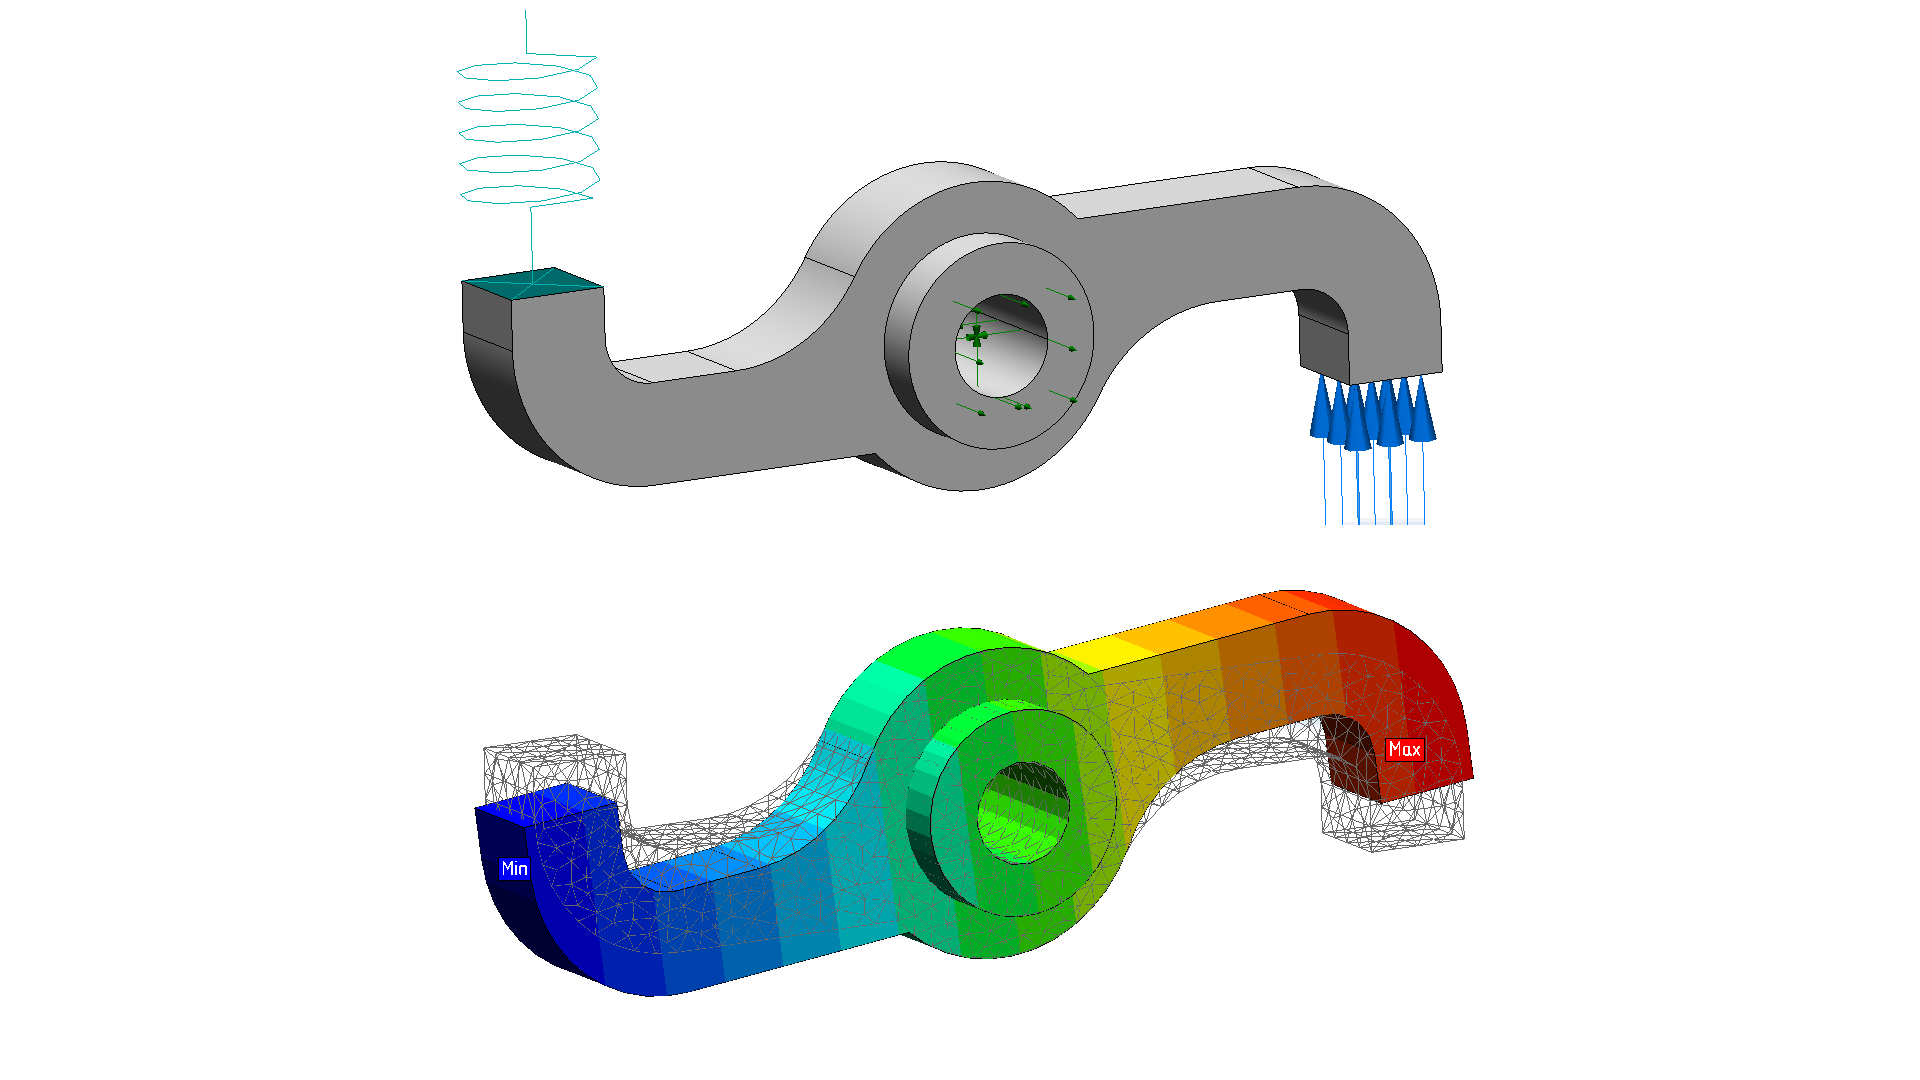 Tera Analysis Implements C3D Toolkit for FEA Simulation Software, photo 2